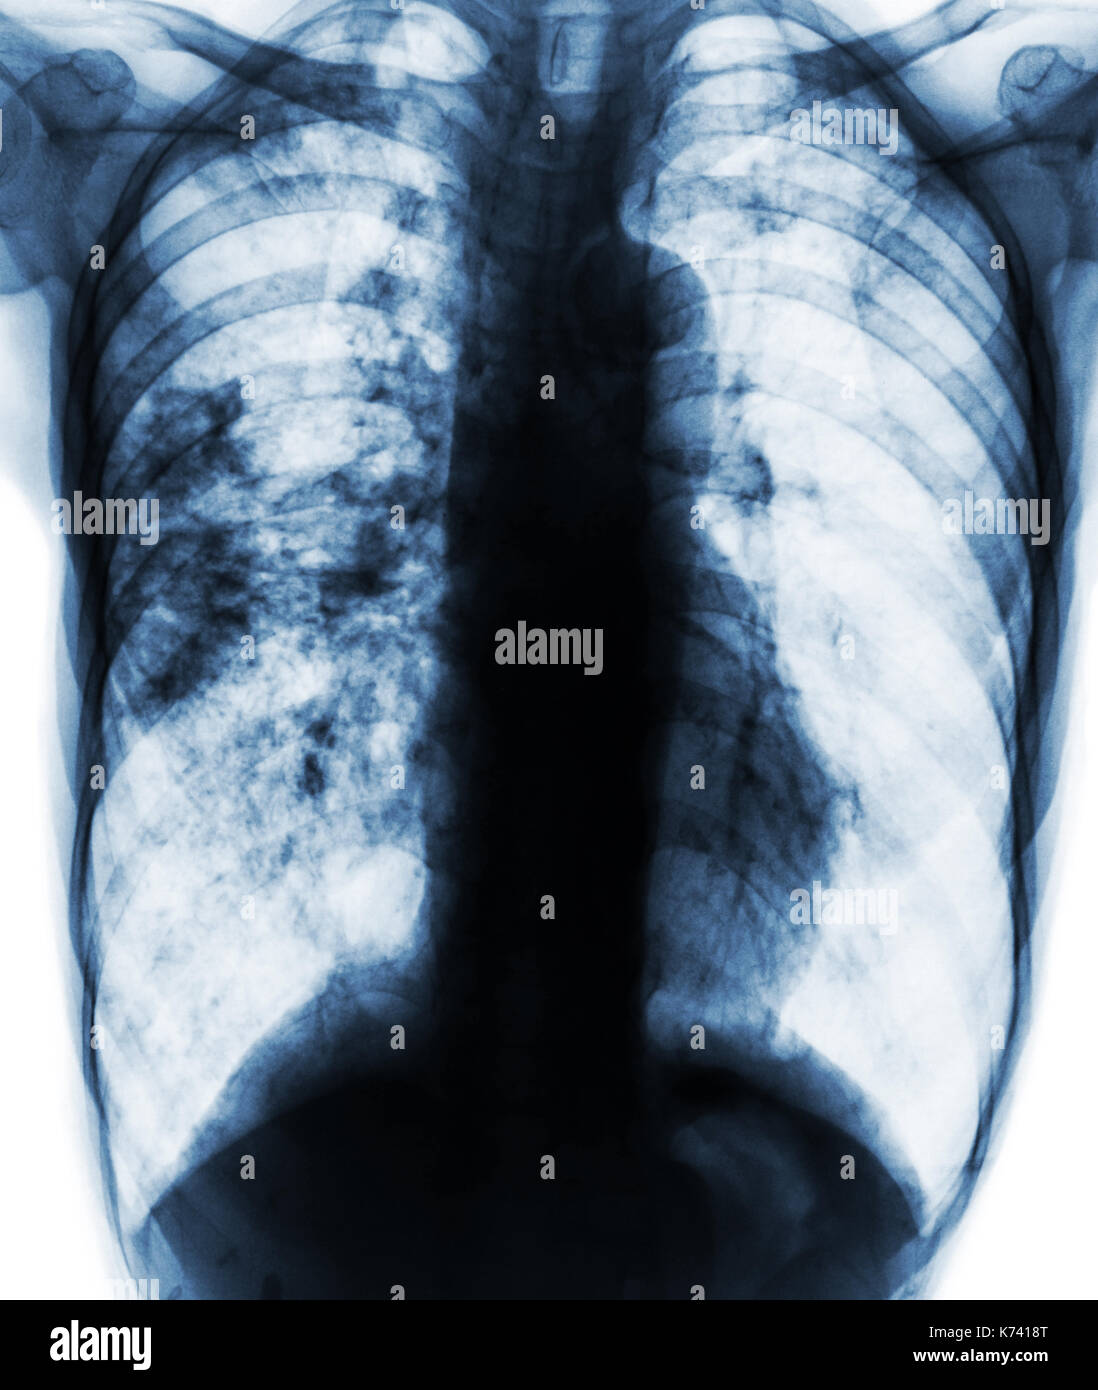 Pulmonary tuberculosis . Film x-ray of chest show patchy infiltrate at right lung due to TB infection . Stock Photo